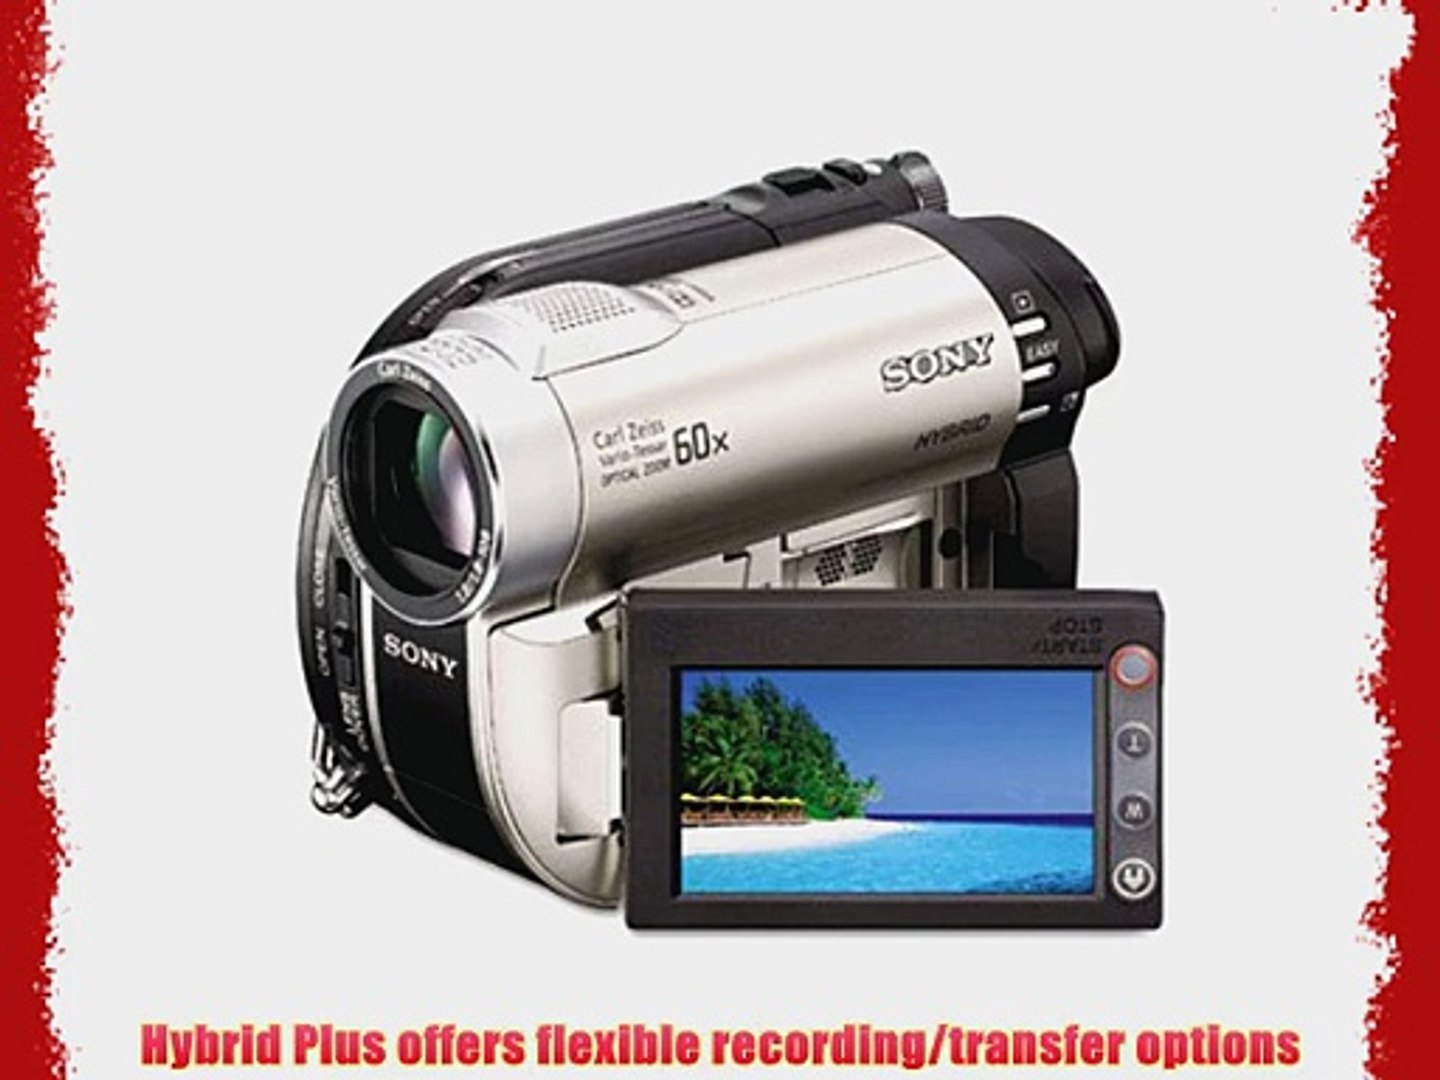 Sony Handycam DCR-DVD850 DVD Hybrid Camcorder with 60X Optical Zoom  (Silver) - video Dailymotion